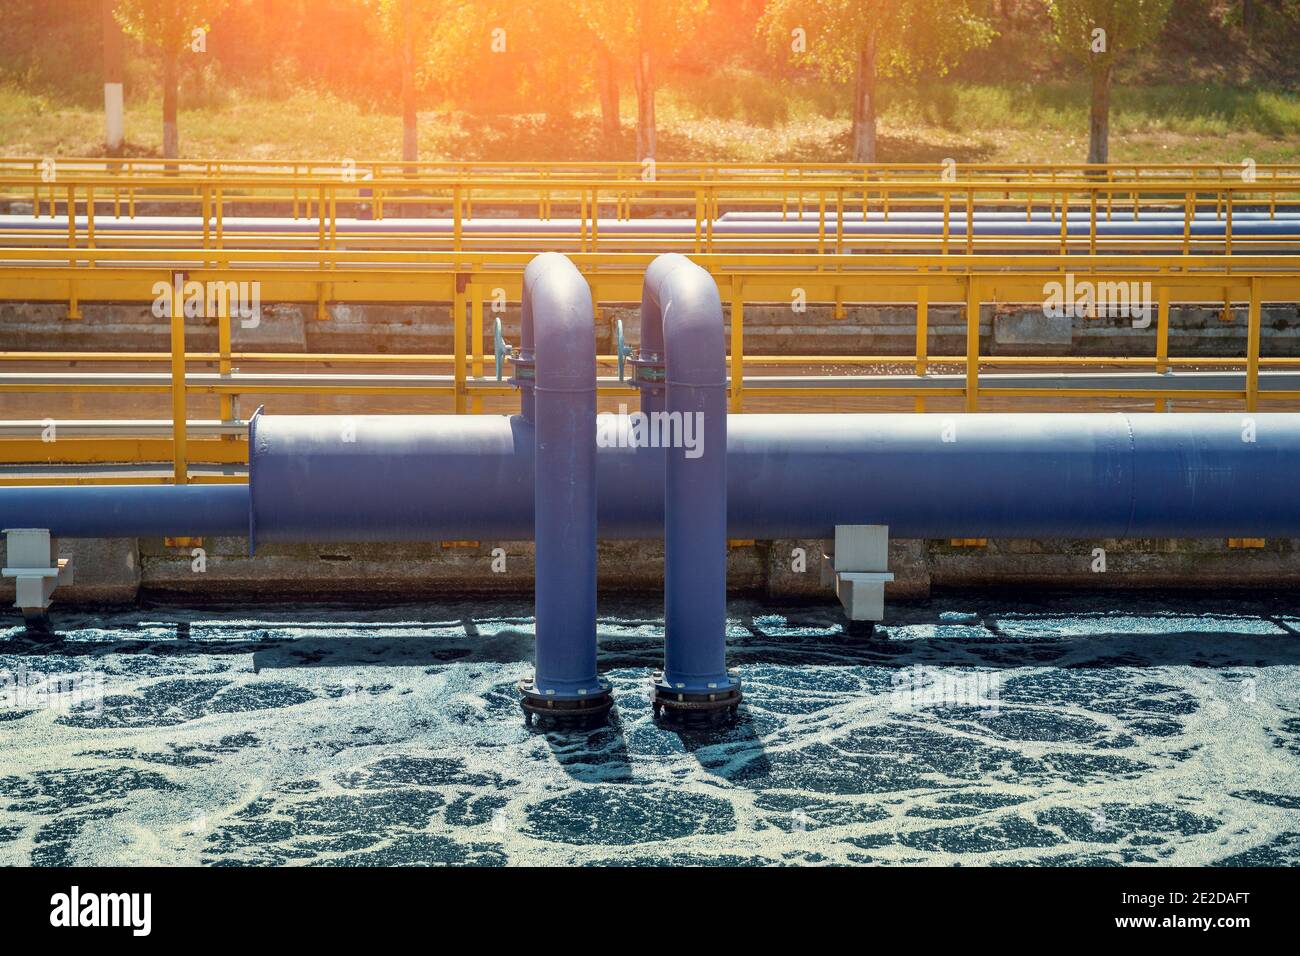 Aerated activated sludge tank at modern wastewater treatment plant. Stock Photo